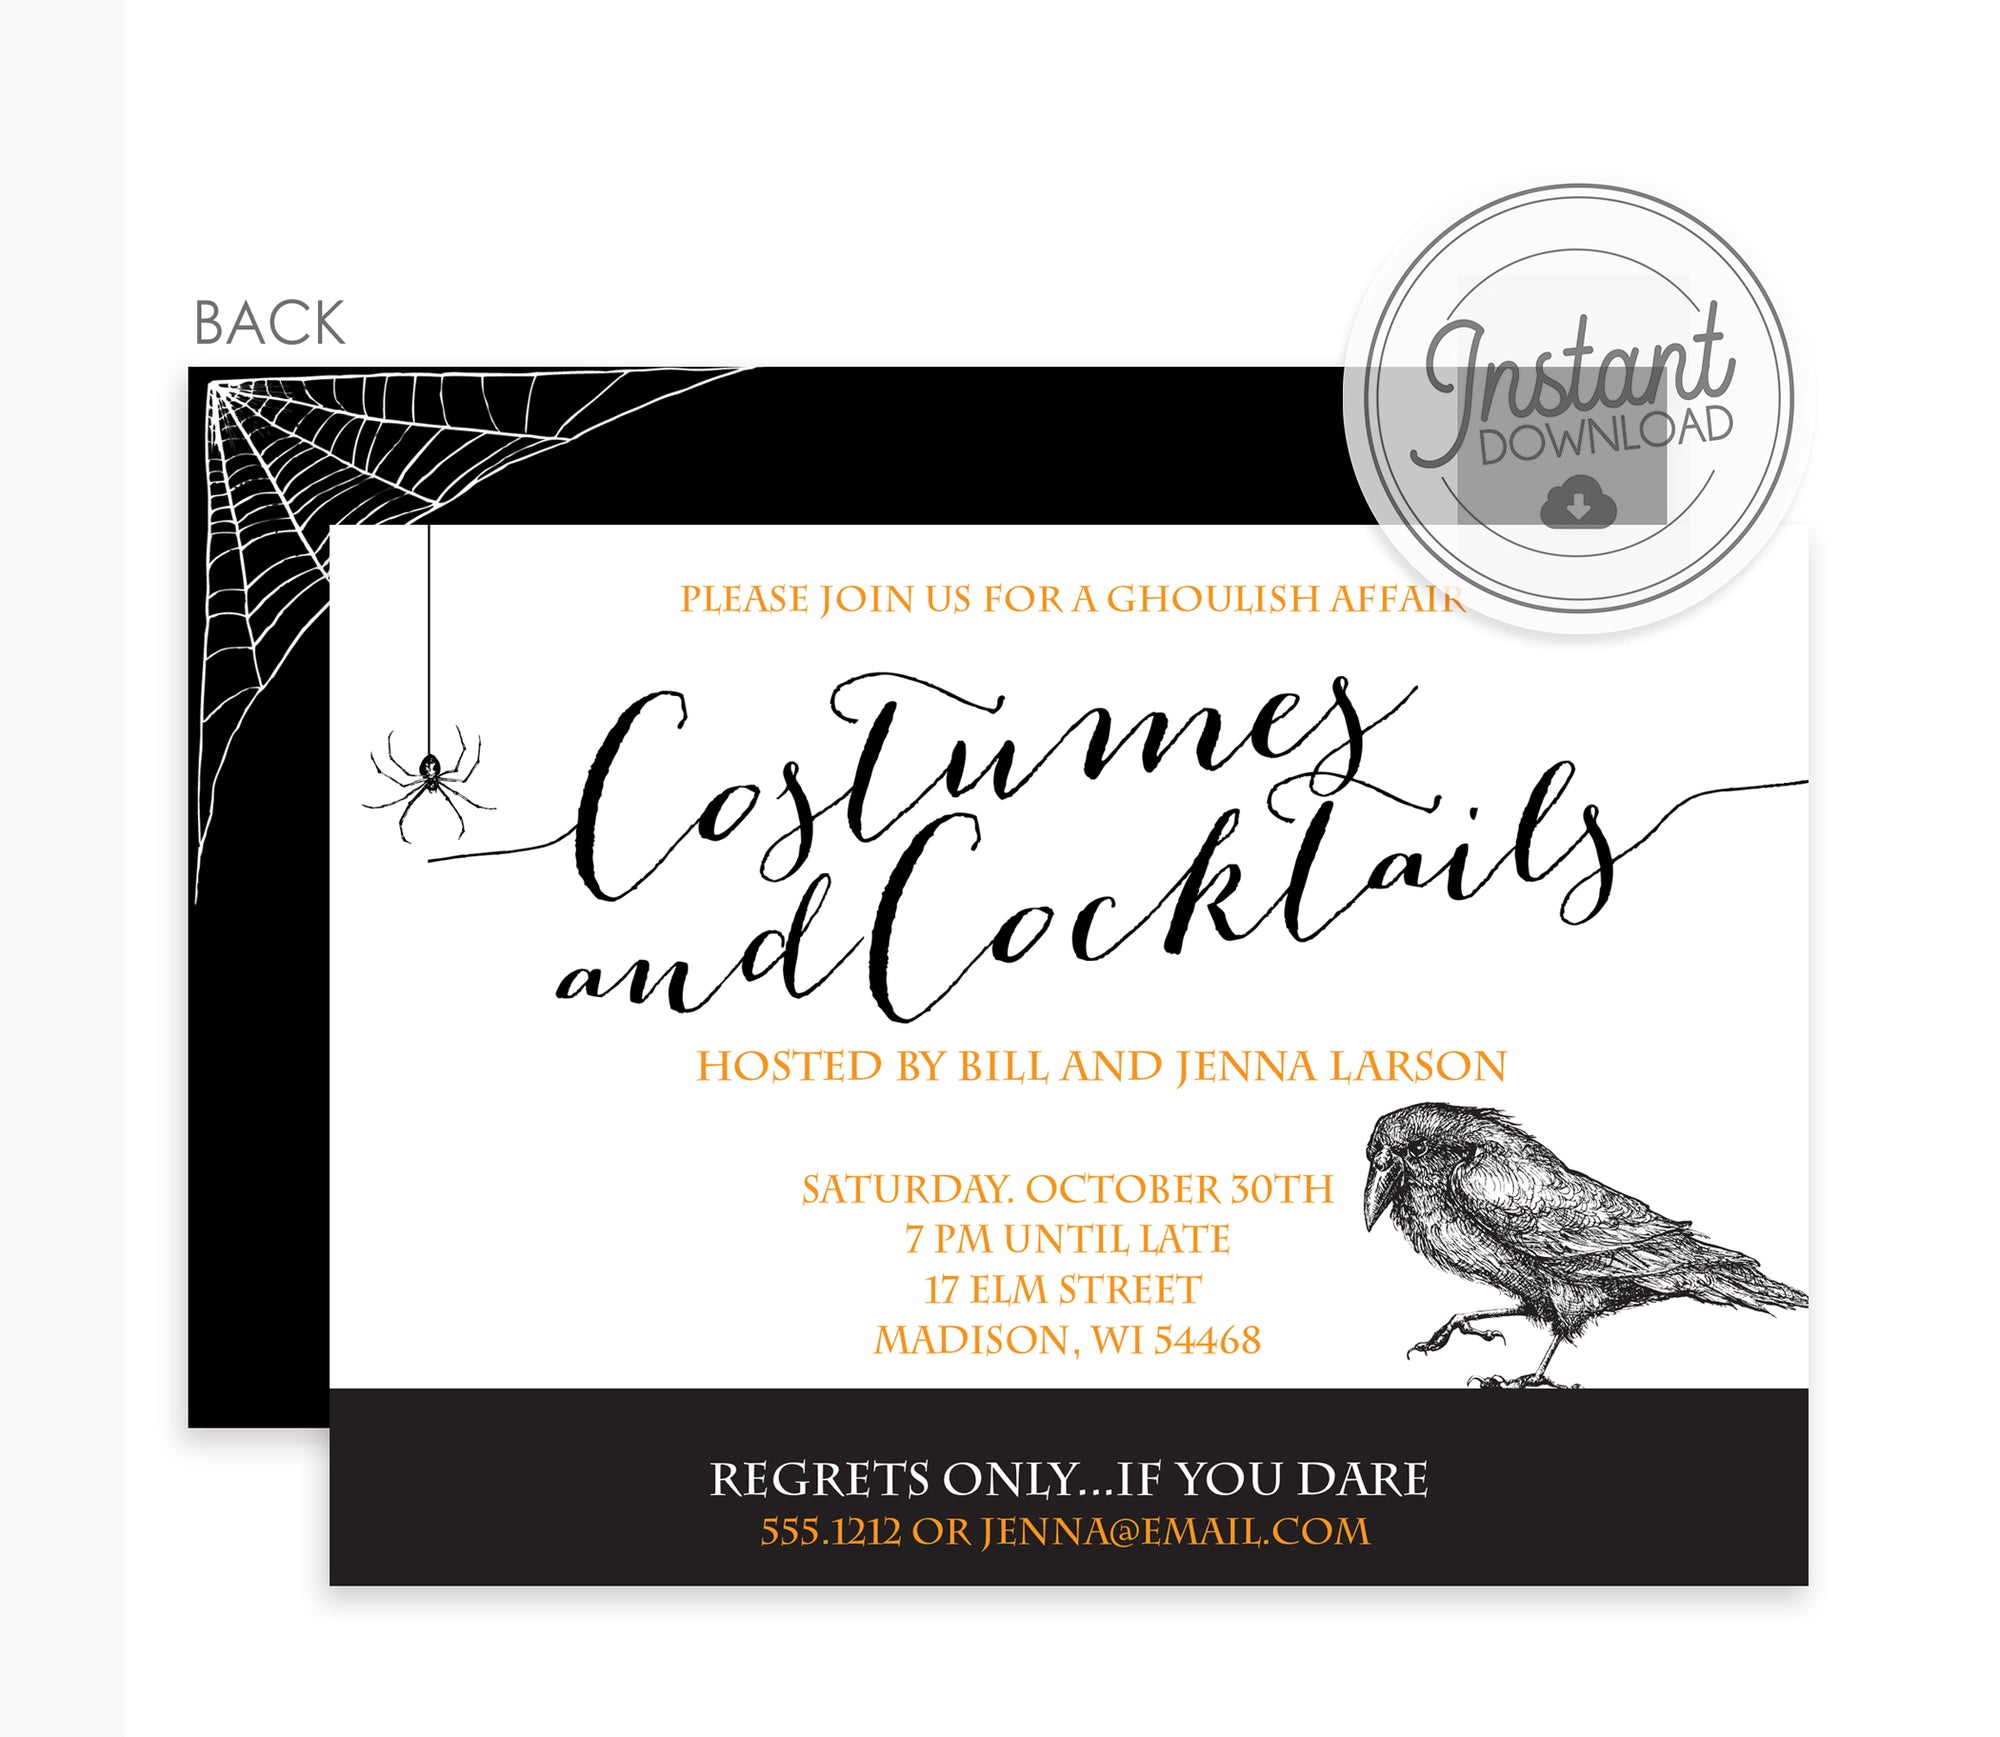 Costumes and Cocktails Halloween Invitation (DIY)